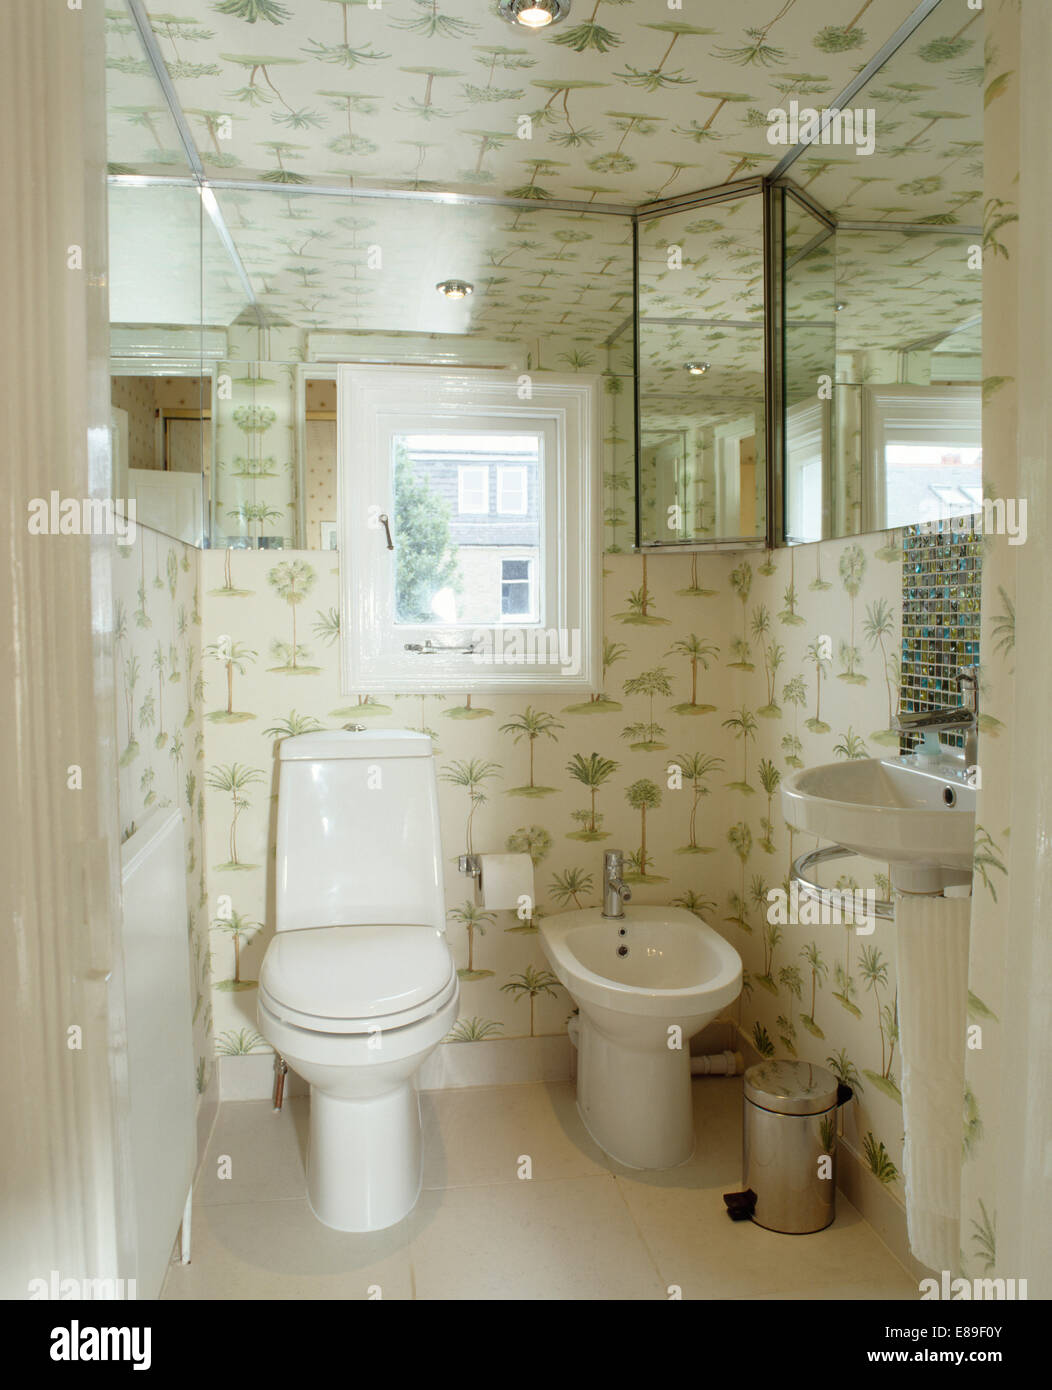 Quirky Downstairs Toilet Ideas | The Brighton Bathroom Company